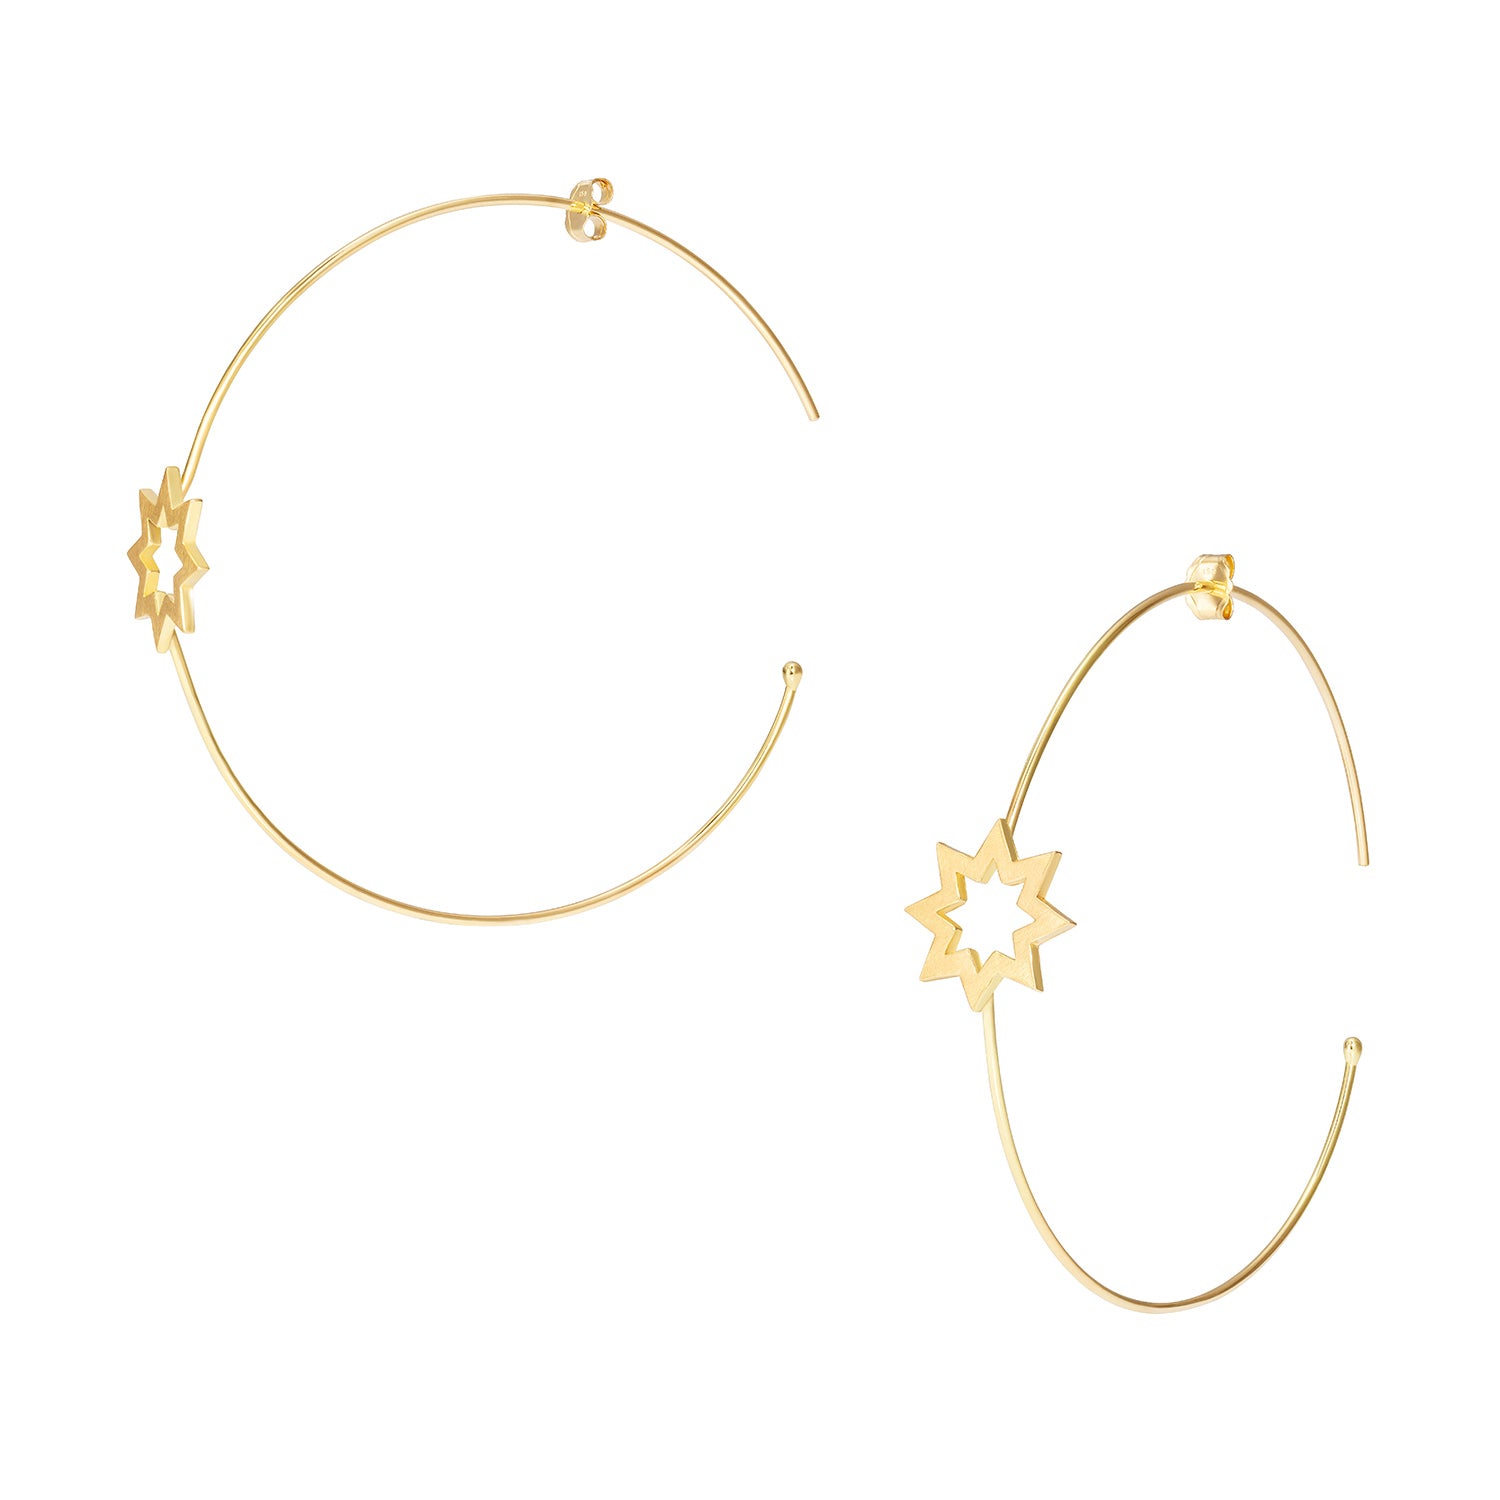 Sweet Pea 18ct yellow gold Reach For The Stars hoop earring. Star and hoop earring.